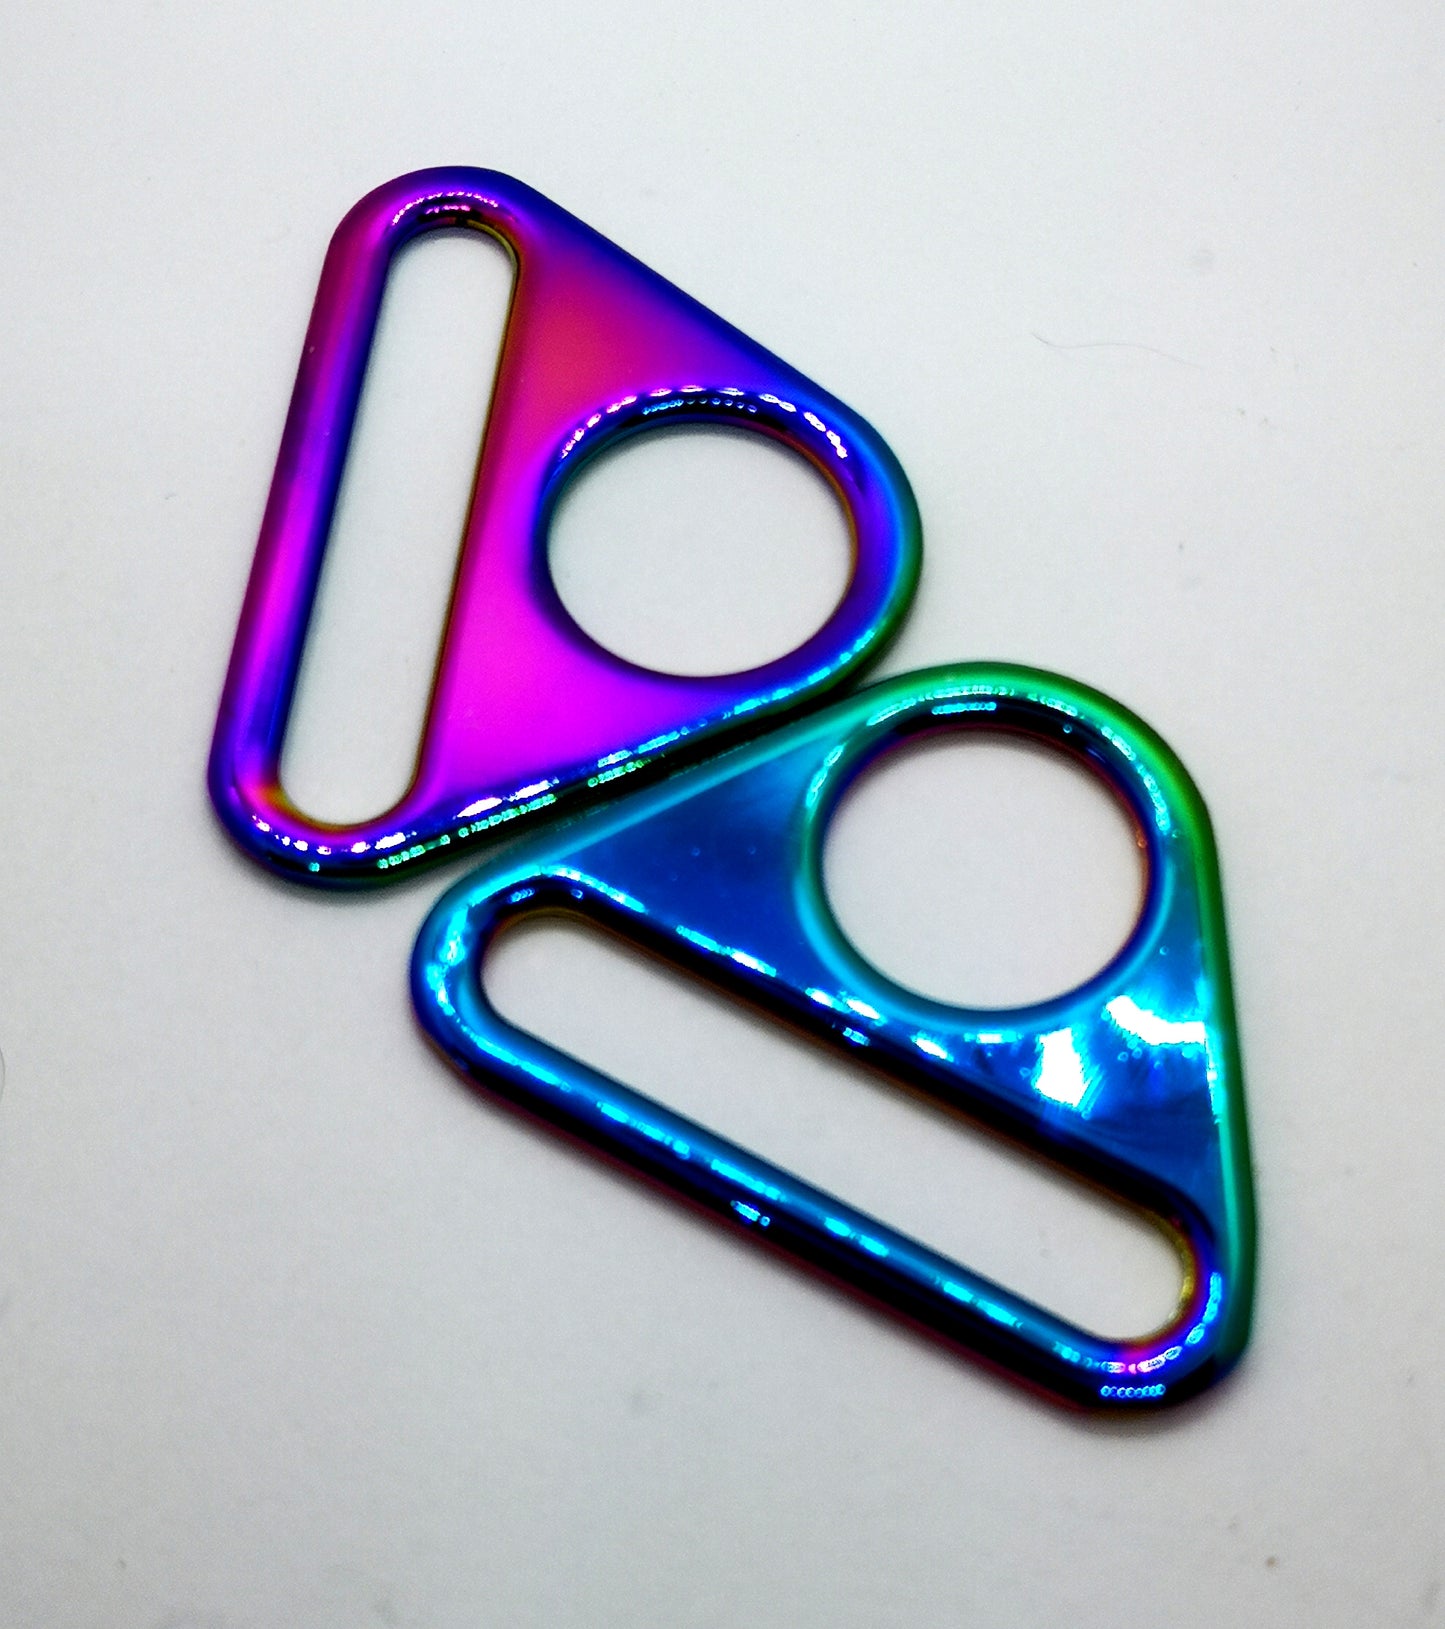 1.5" Rainbow Triangle Strap Connector set of 2